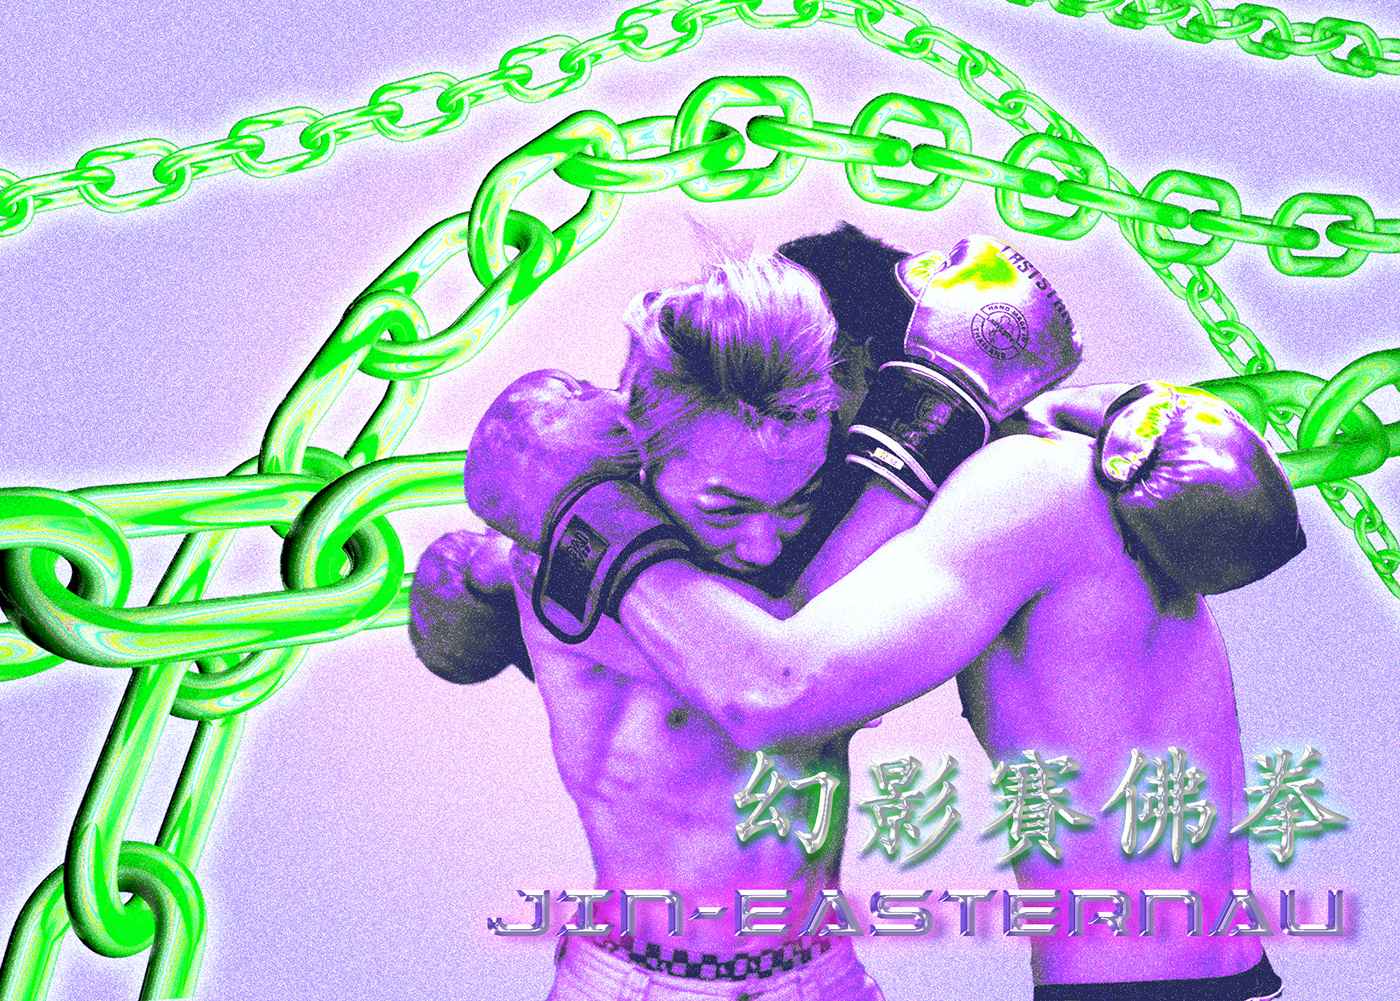 Blog Boxing chain cover photo